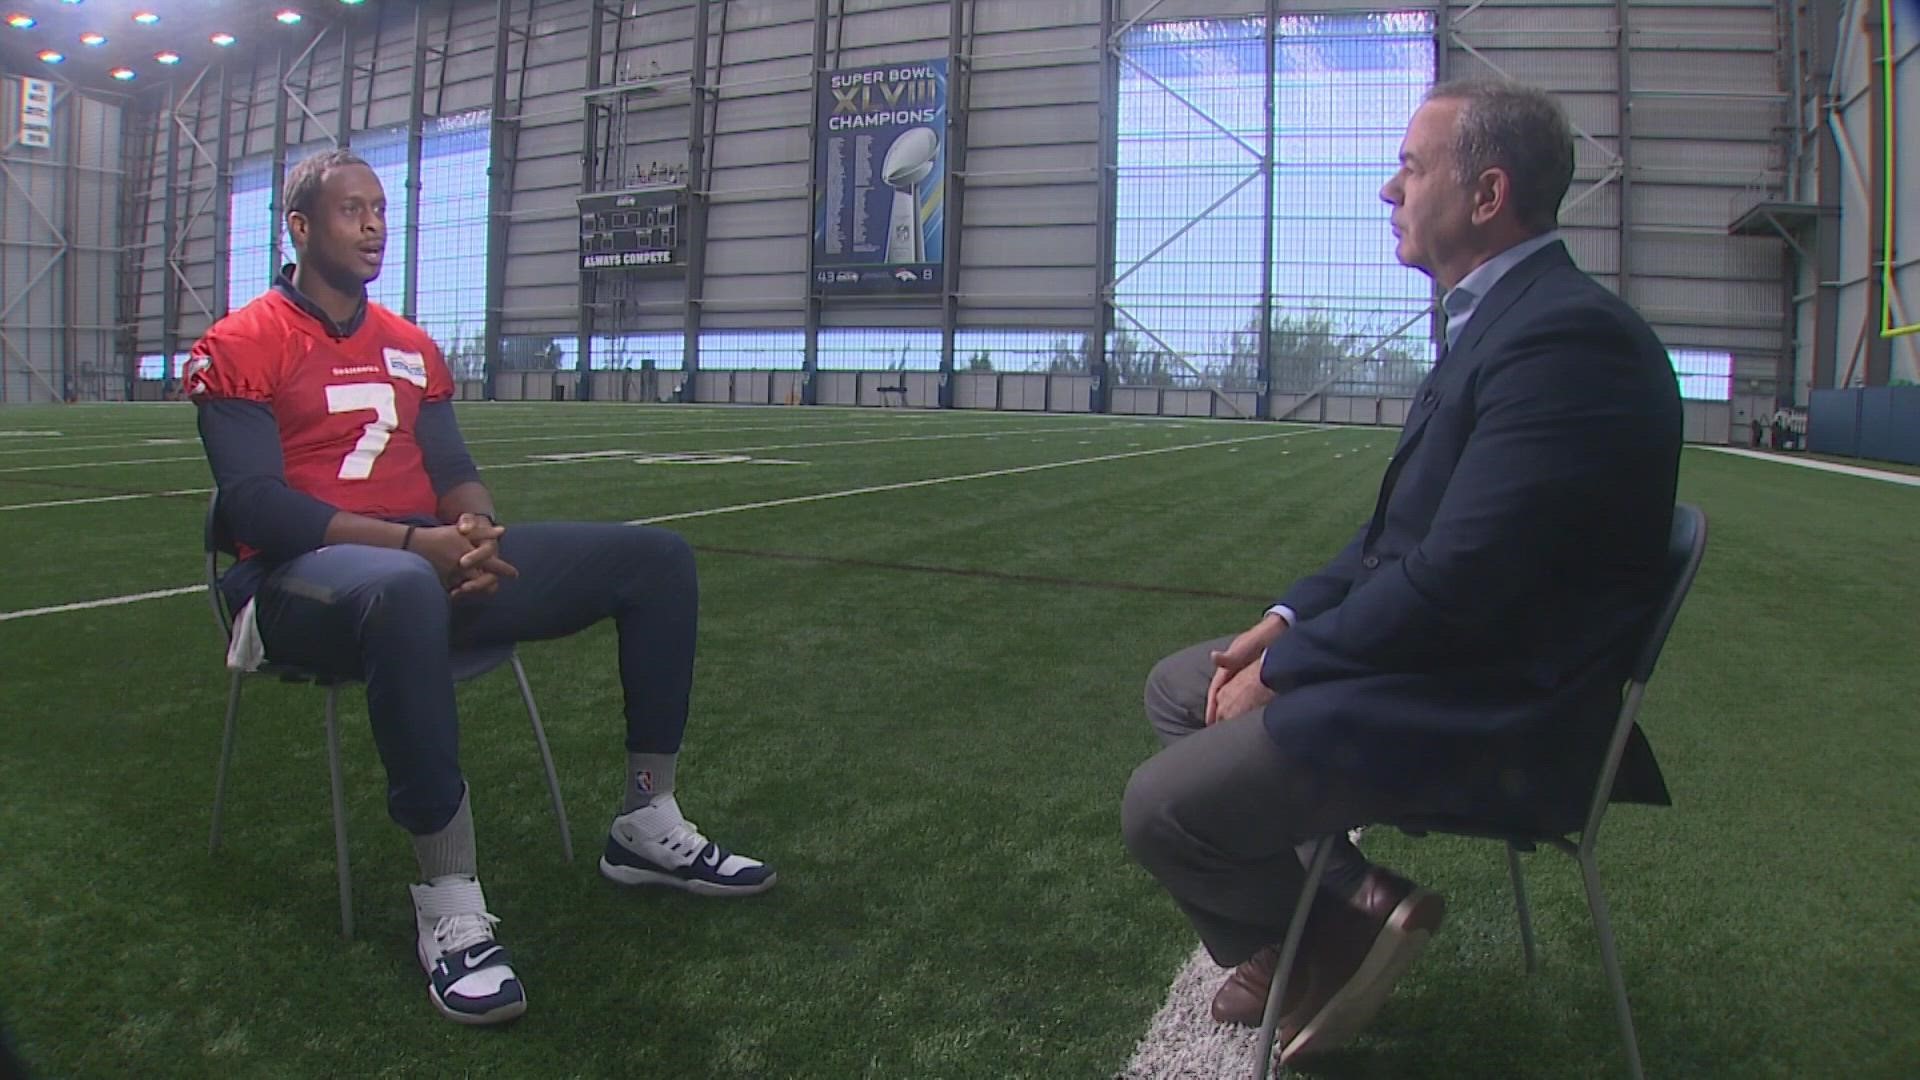 Seahawks quarterback Geno Smith sits down with Paul Silvi to talk about studying the game, supporting his team and choosing football over art school.